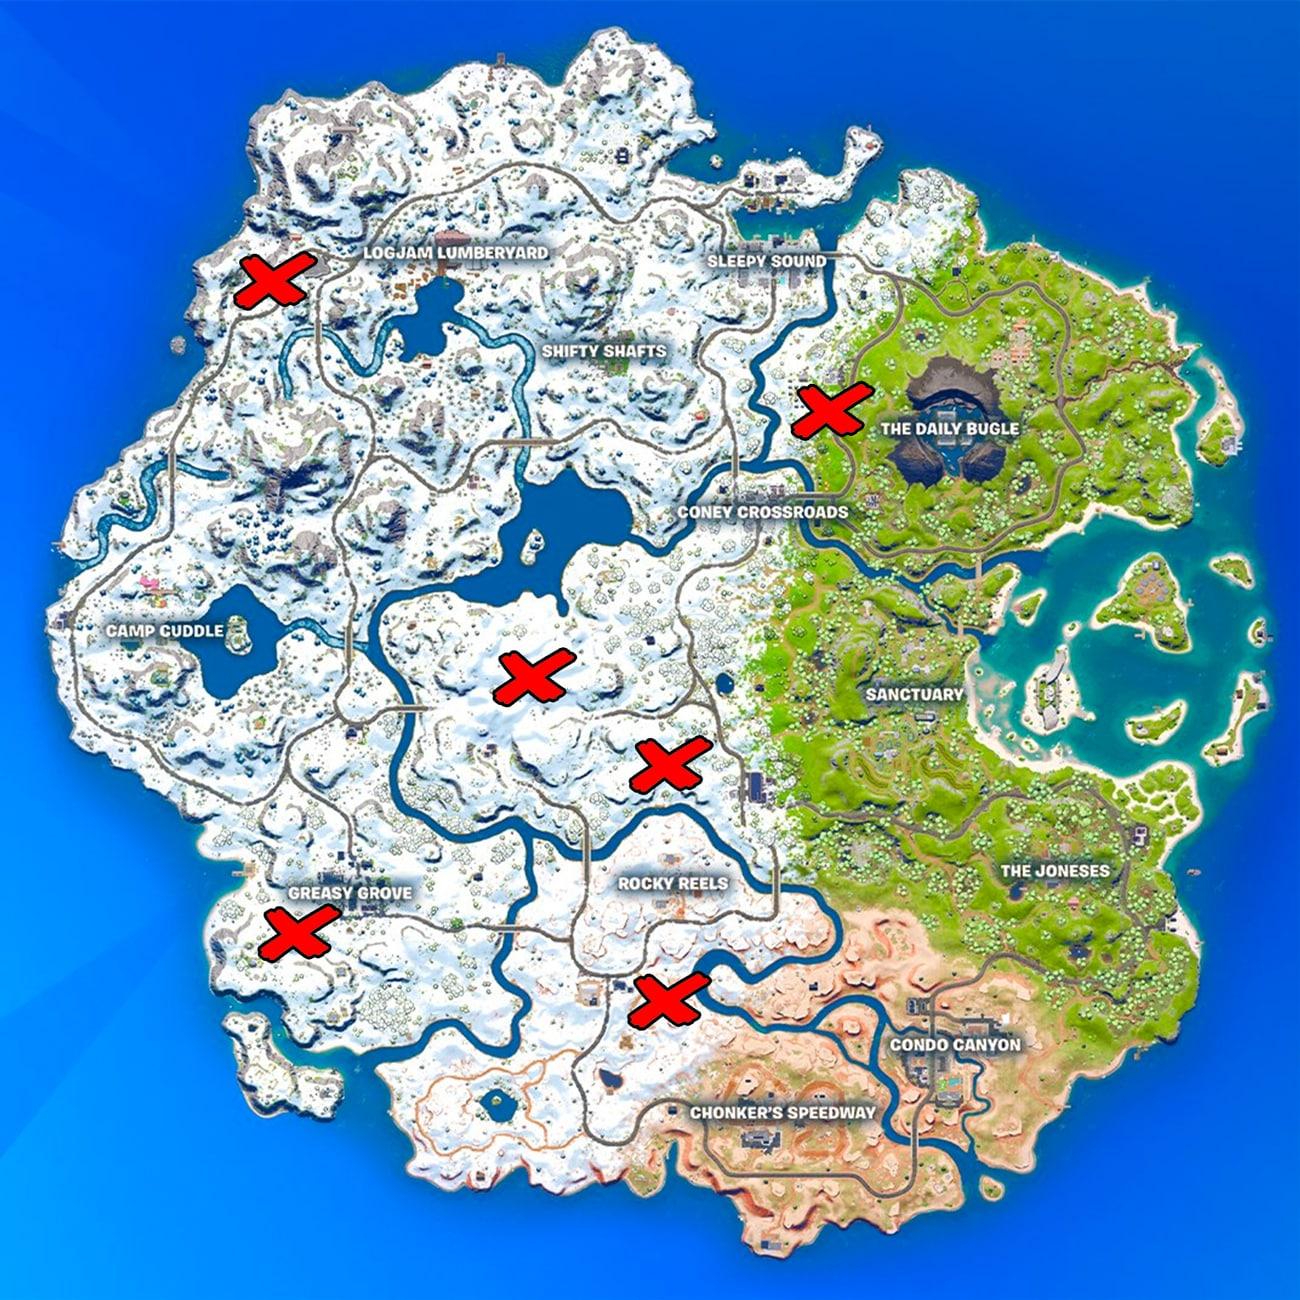 Chicken locations marked on the Fortnite Chapter 3 map